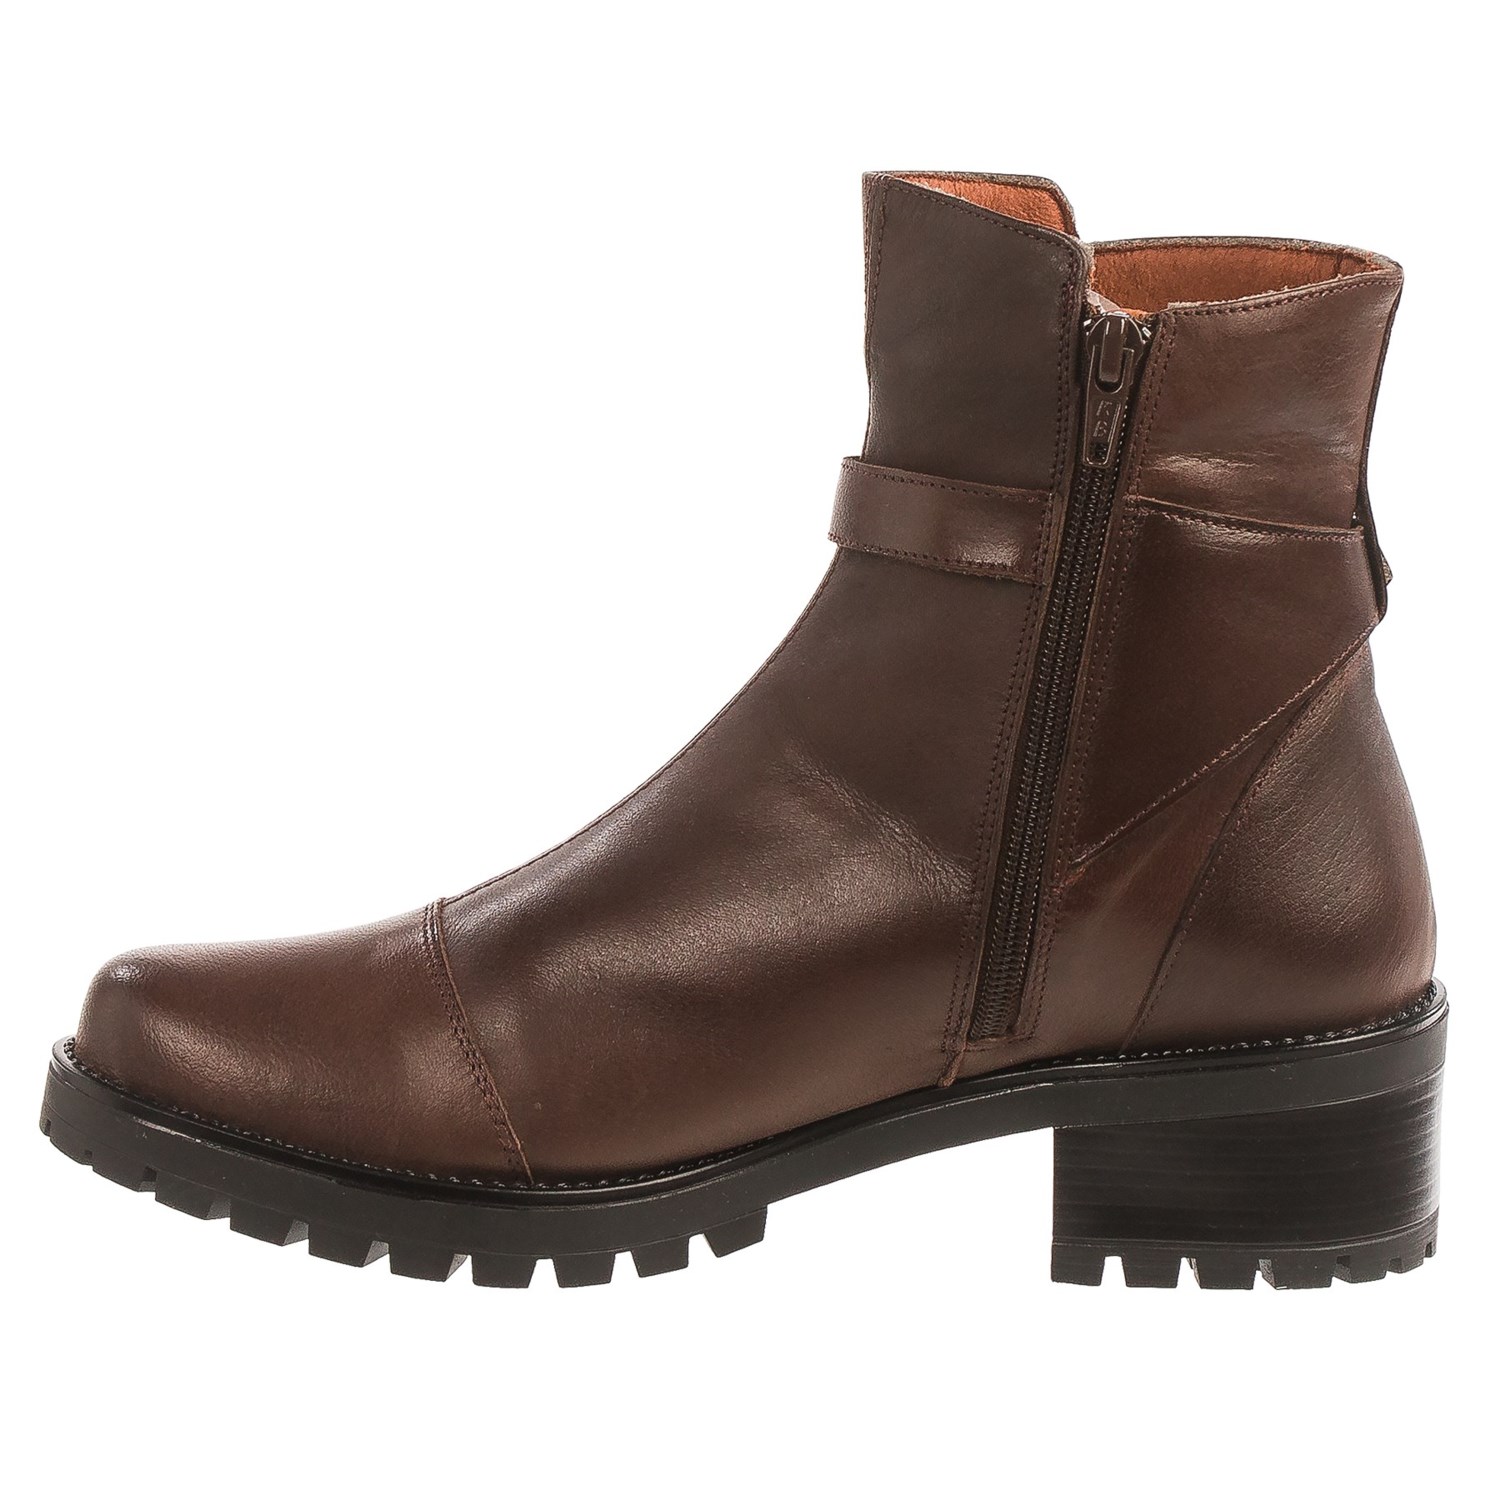 Eric Michael Mary Boots (For Women) - Save 78%